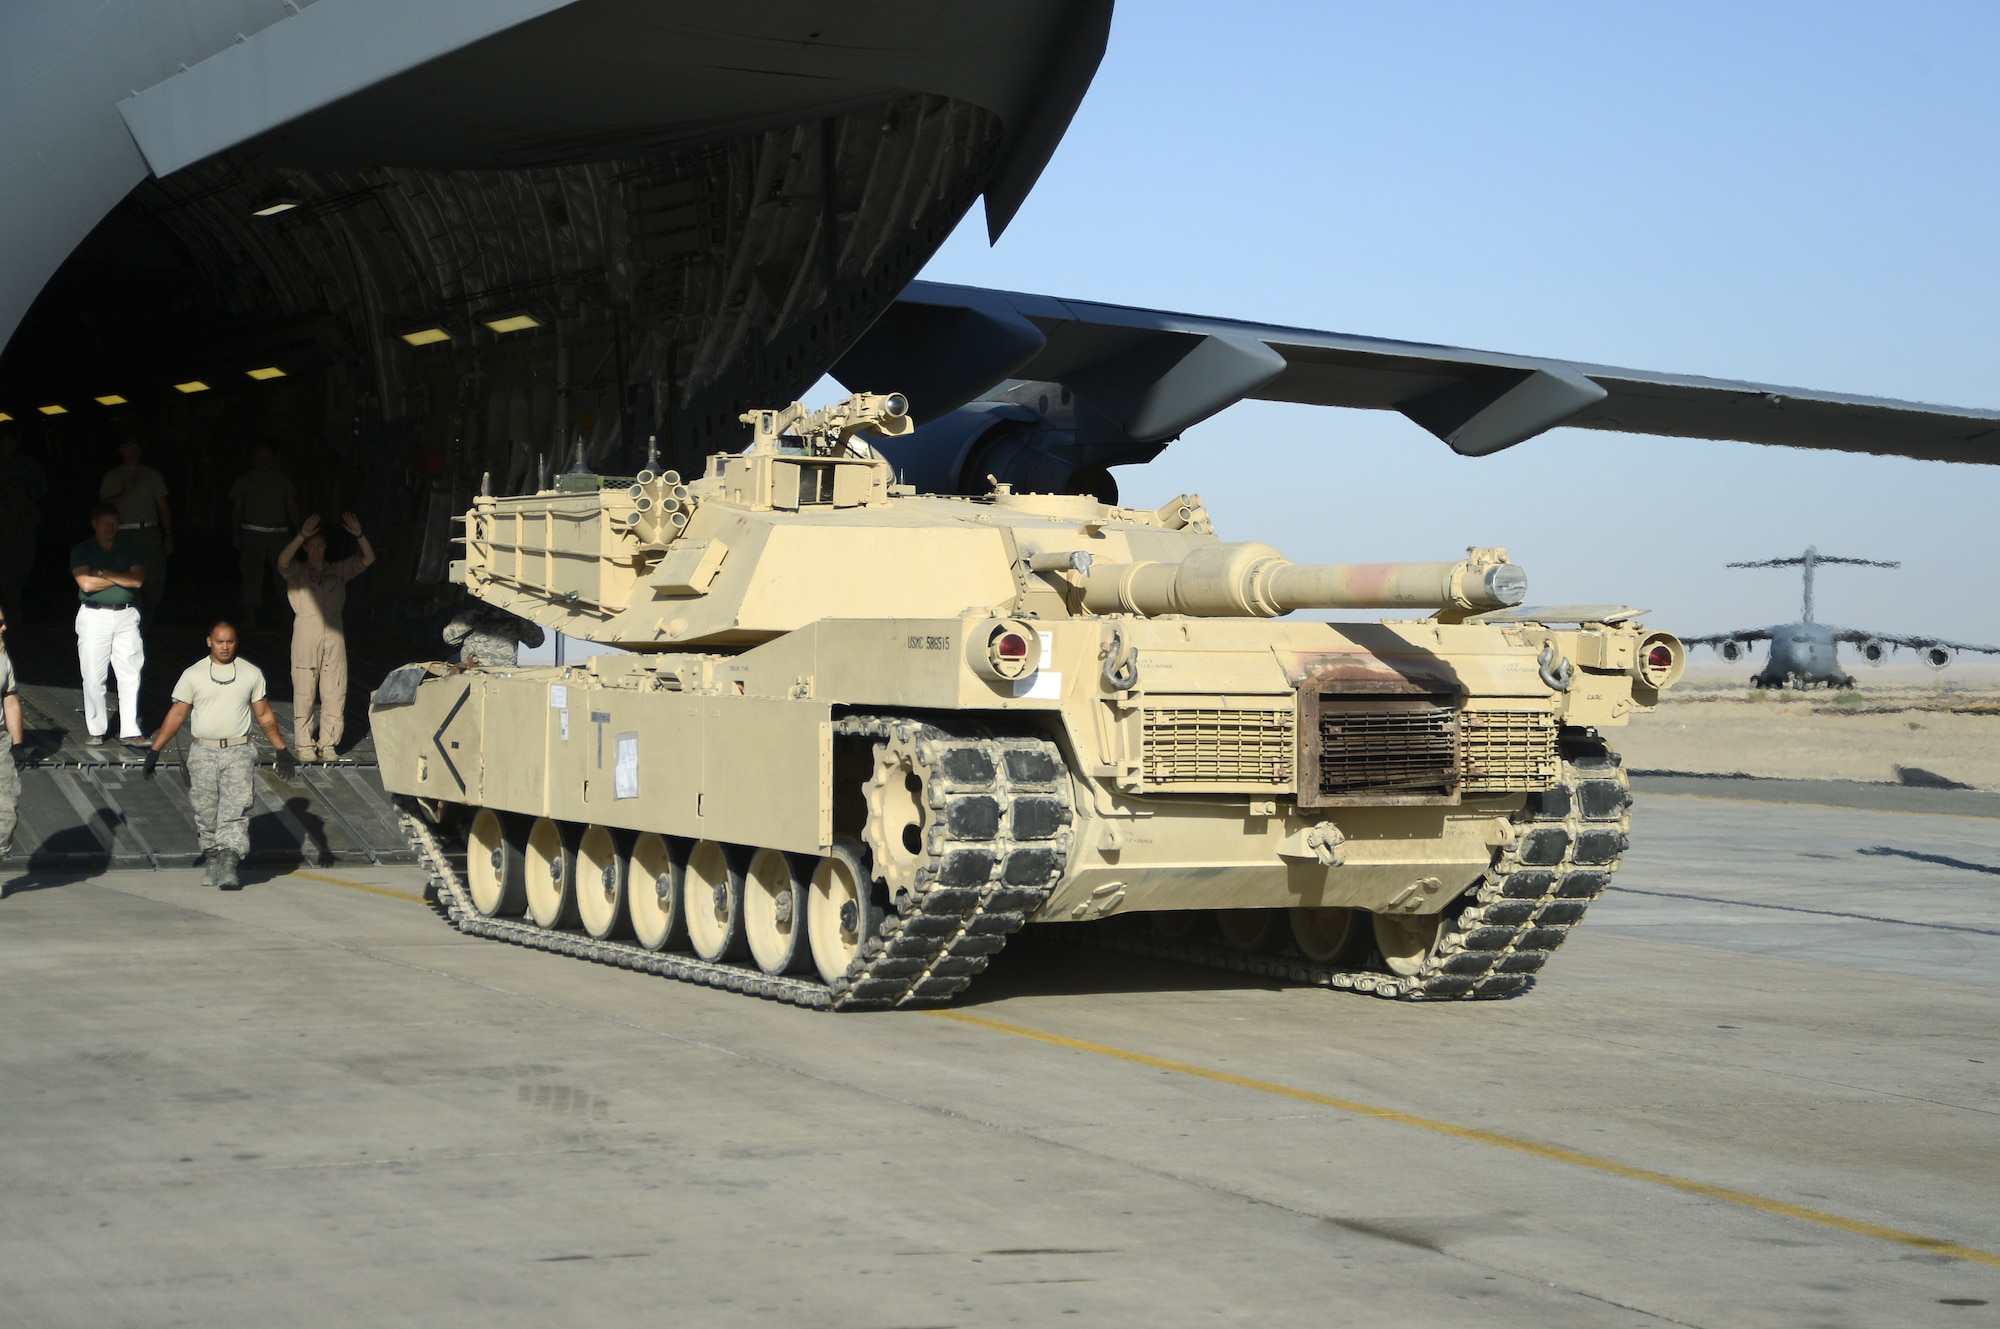 Members of the 386th Air Expeditionary Wing monitor the offload of a M1 Abrams tank from a C-17 Globemaster III here, Sept. 26, 2013.  The M1 tank offload took little time because of the communication and cooperation of the flight crew, 386th Expeditionary Logistics Readiness Squadron personnel, airfield management and the tank driver. (U.S. Air Force photo by Master Sgt. Christopher A. Campbell)